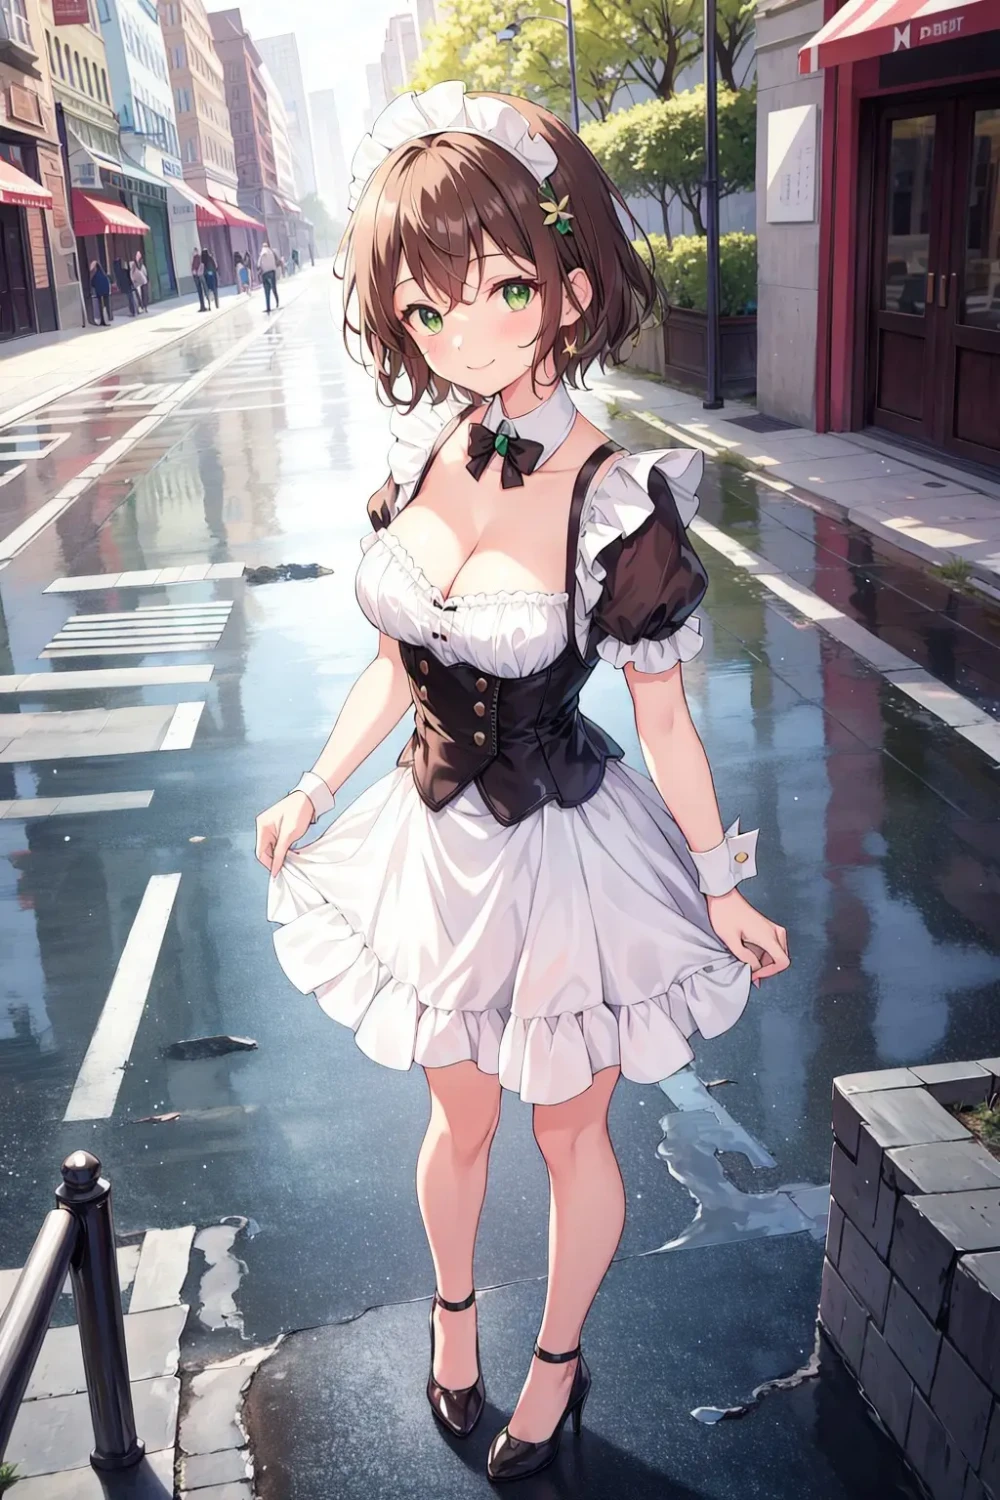 maid-anime-style-all-ages-24